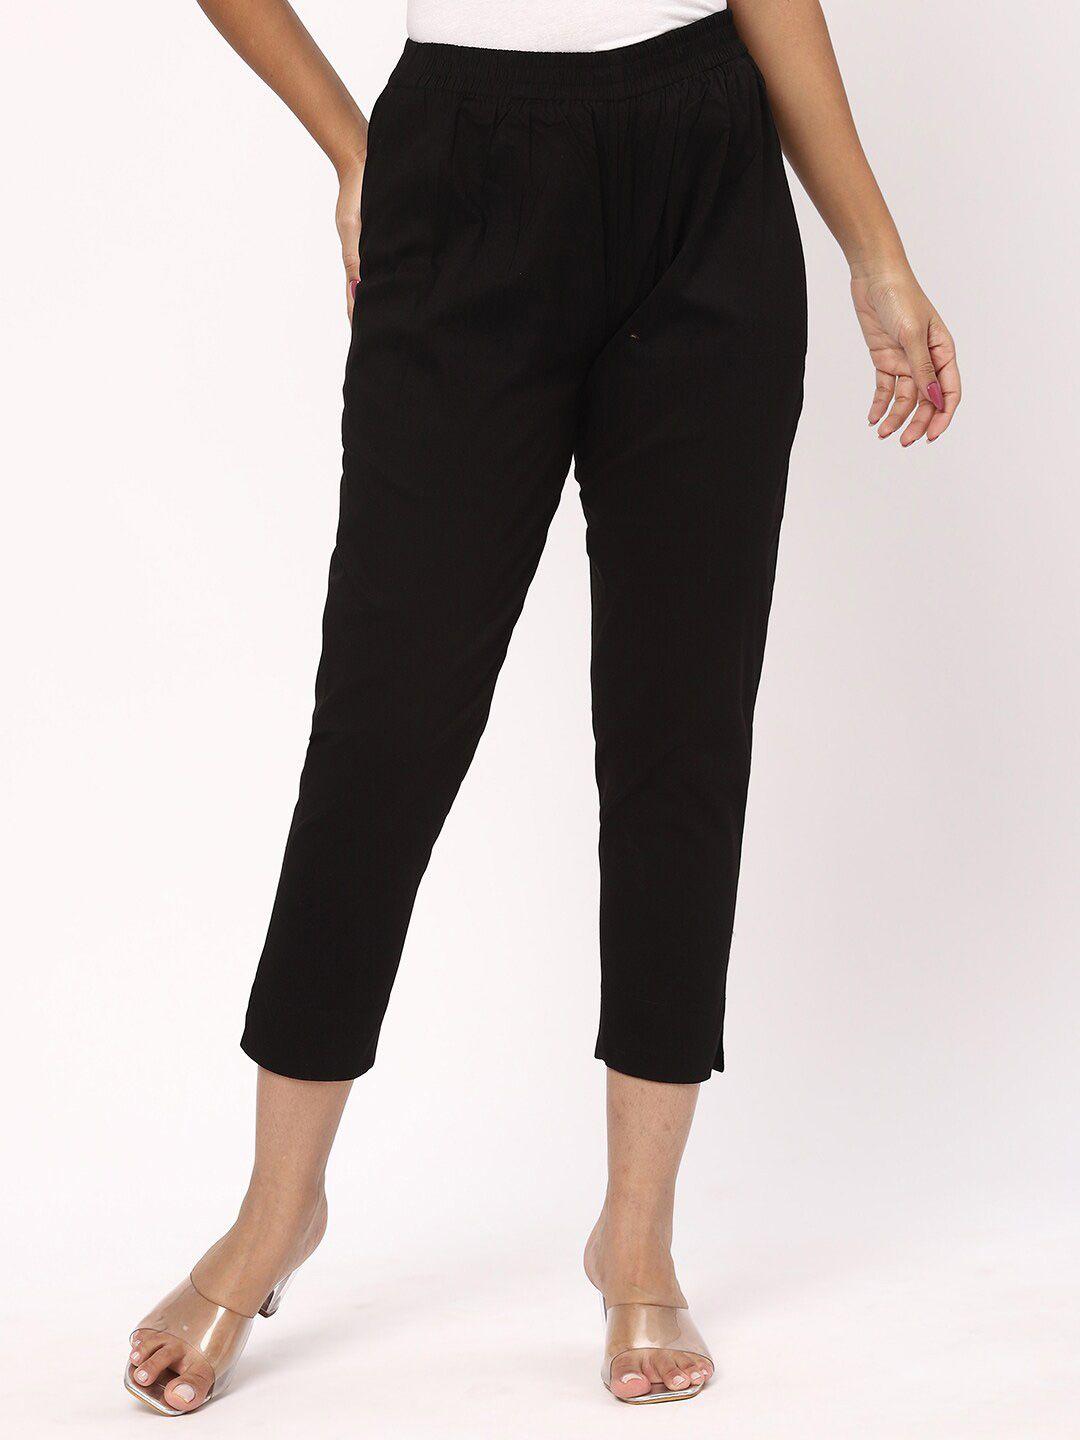 r&b women mid-rise regular fit pleated cotton trousers